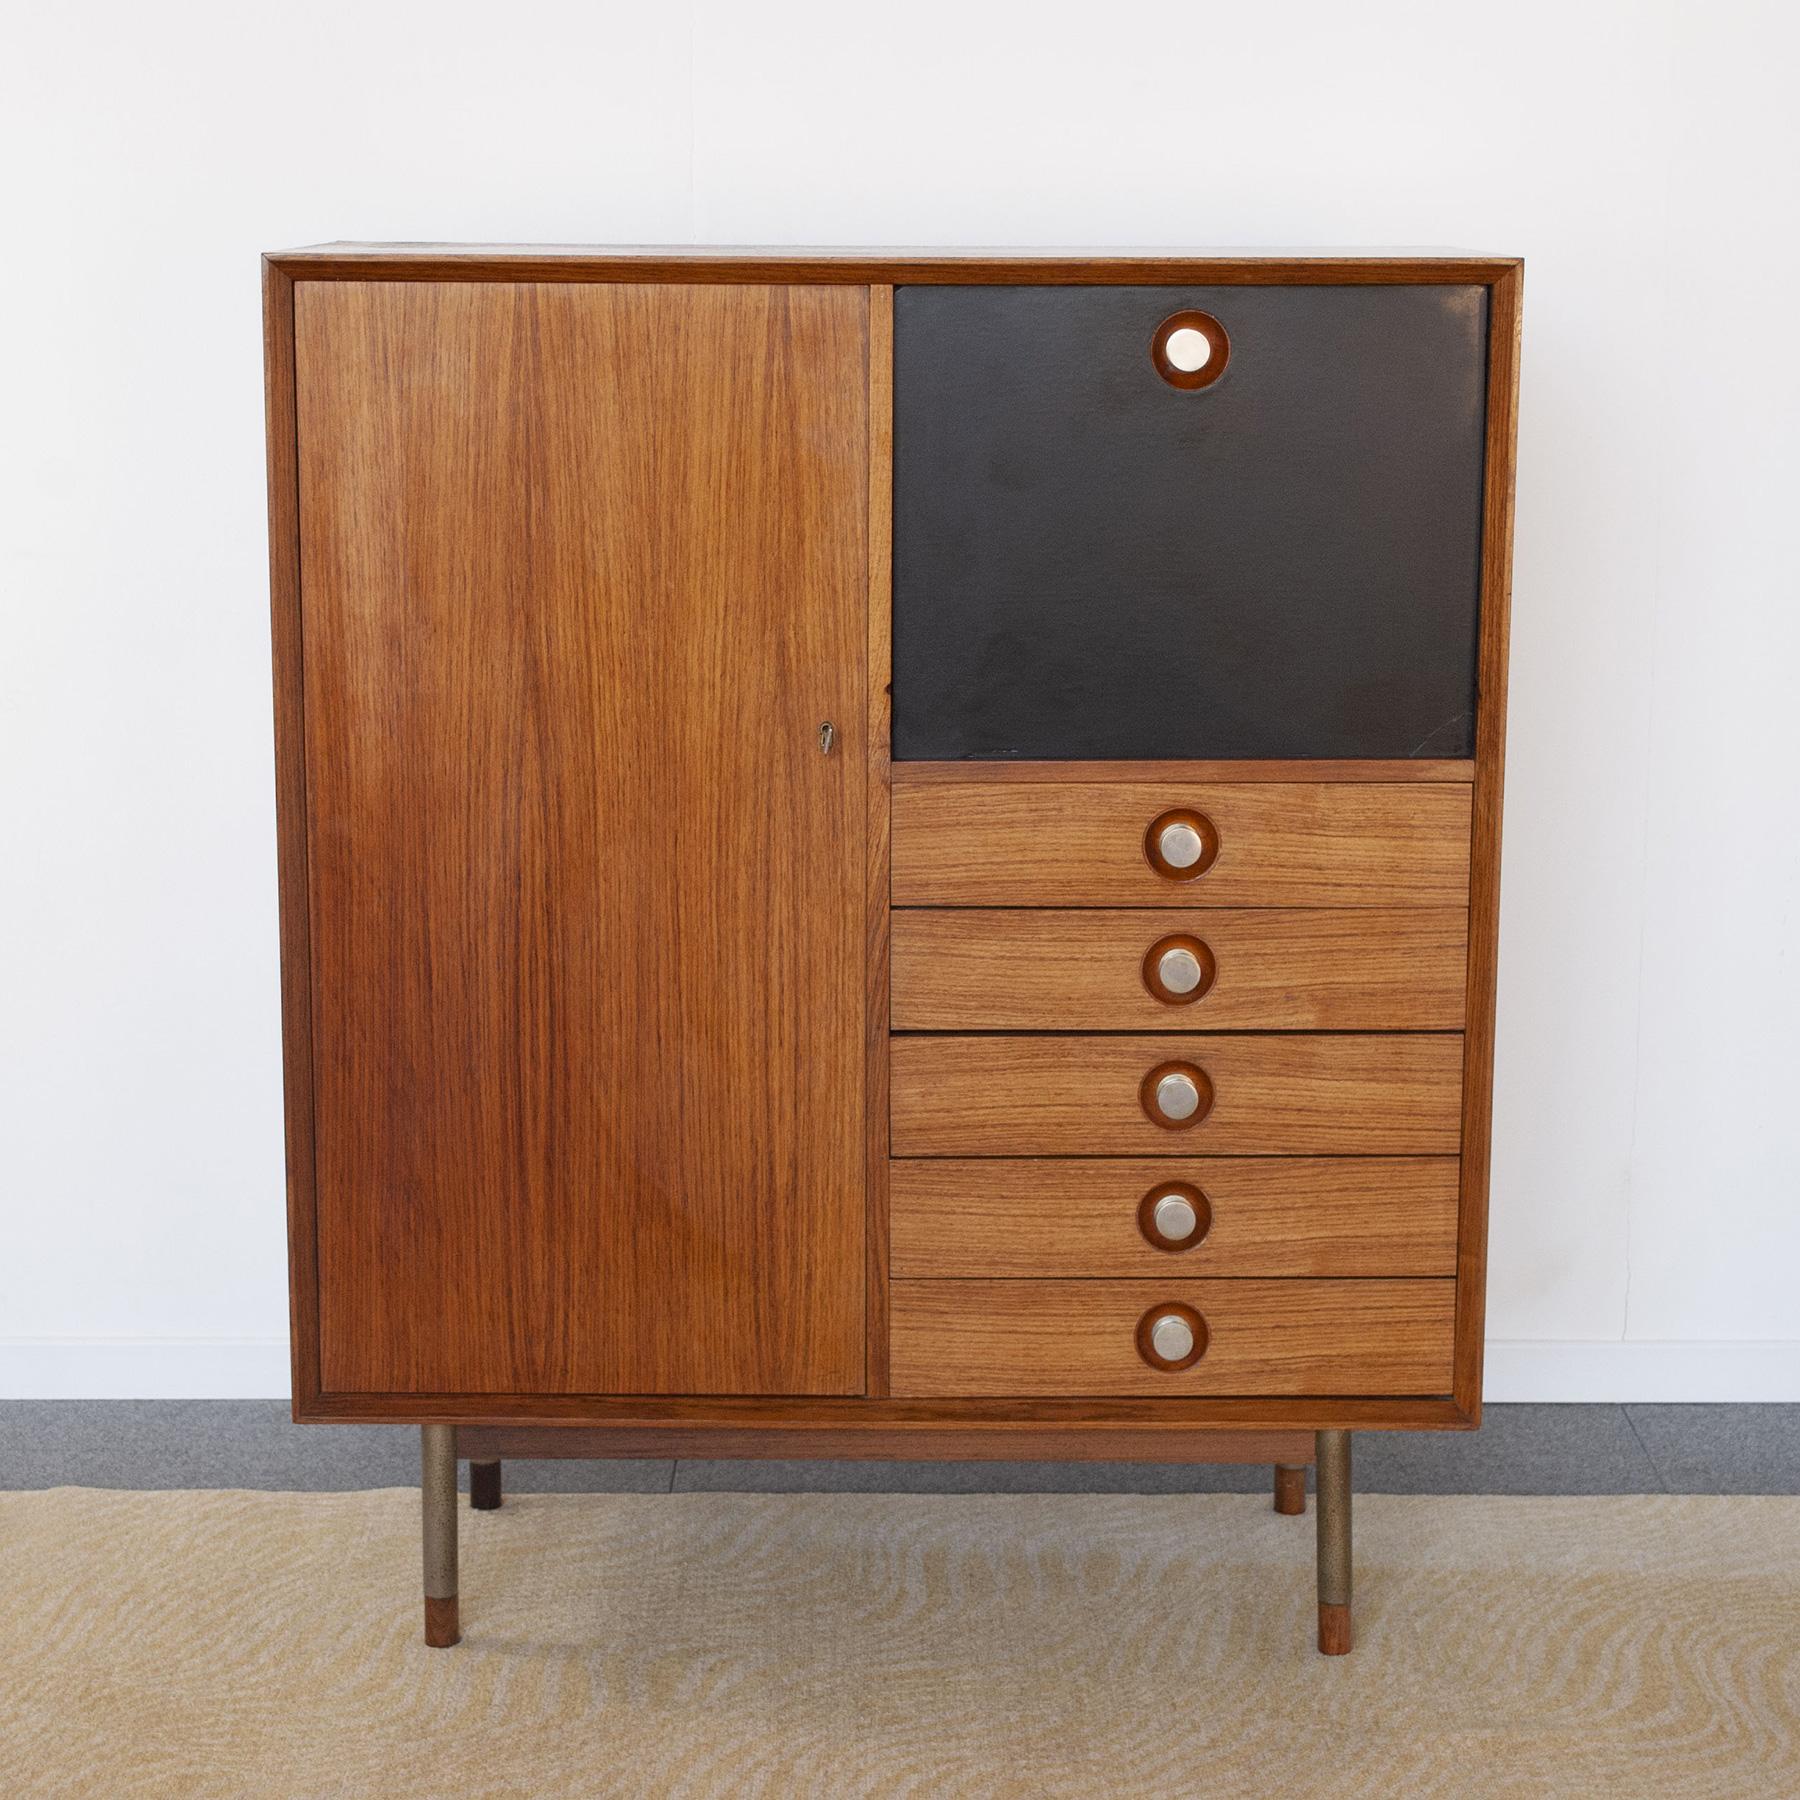 High board in walnut wood composed of a compartment with 5 drawers and a glass compartment and an opening door with lock designed by Georges Nelson, 1960s production.